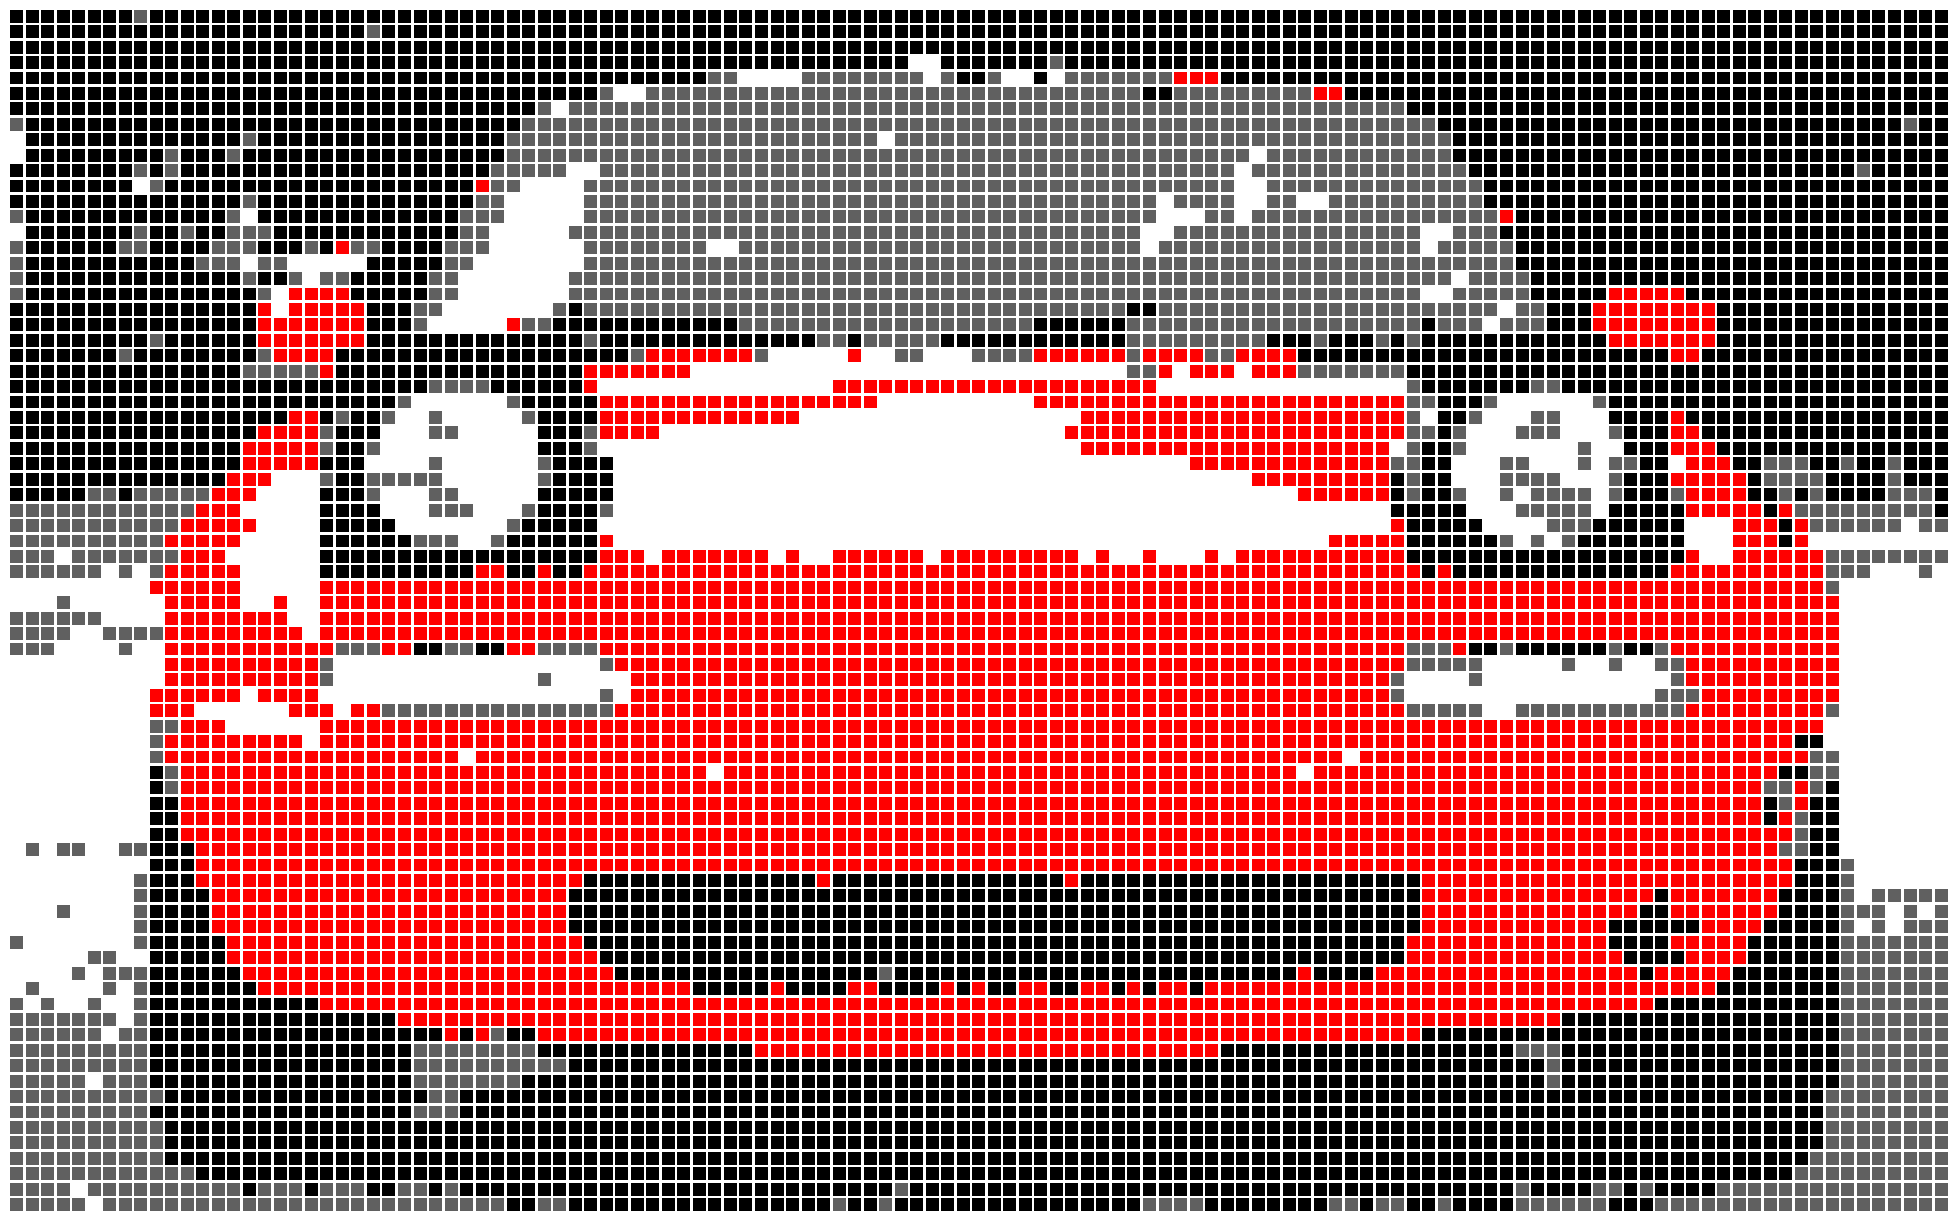 pixelated Miata with manually adjusted centroids